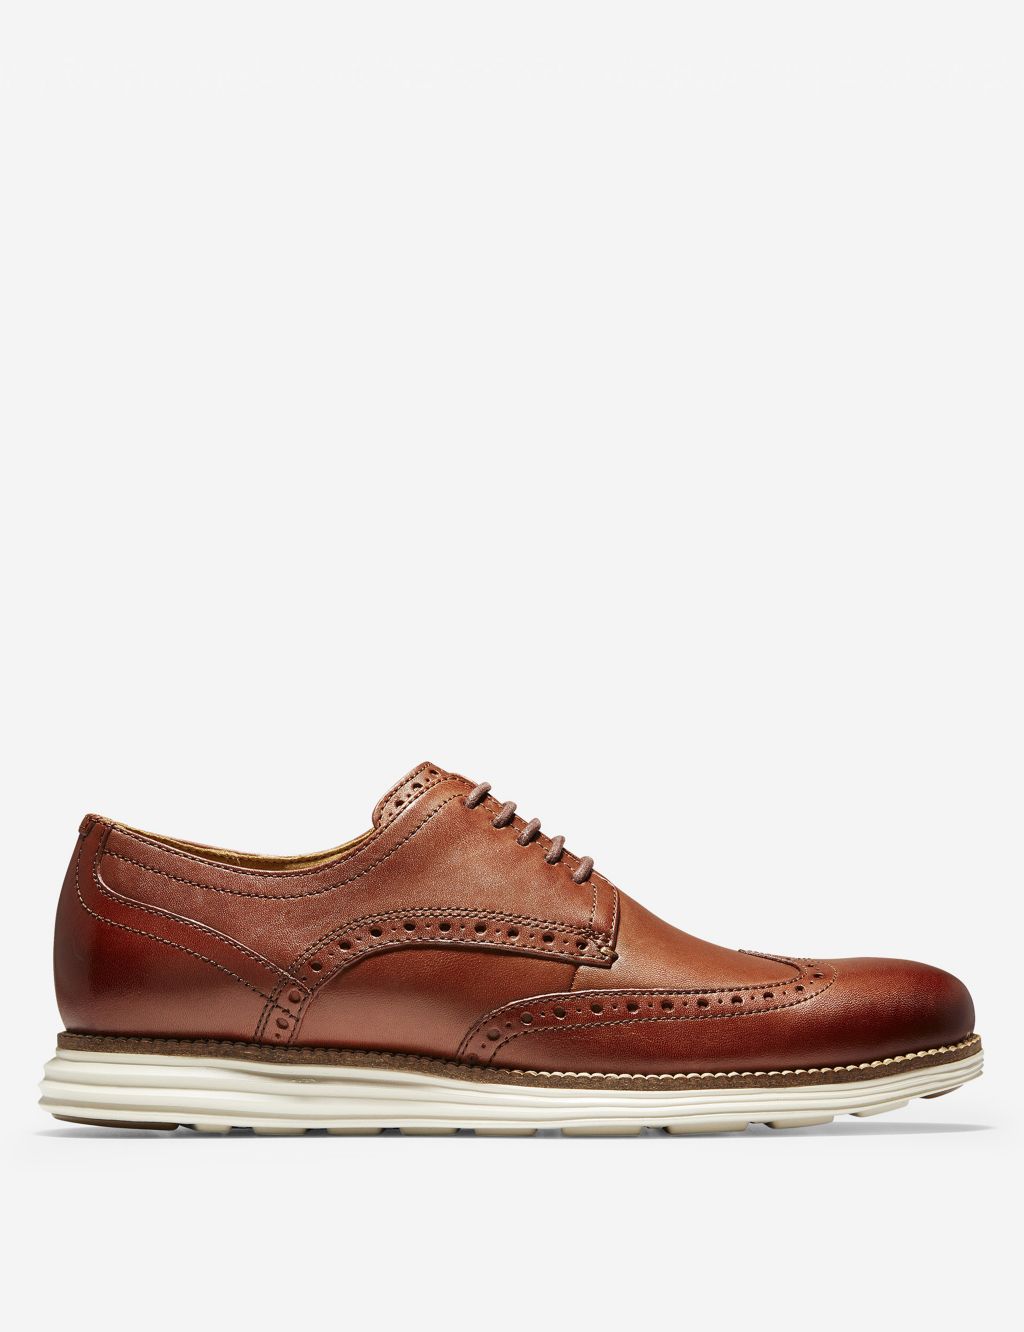 Originalgrand Wide Fit Leather Oxford Shoes